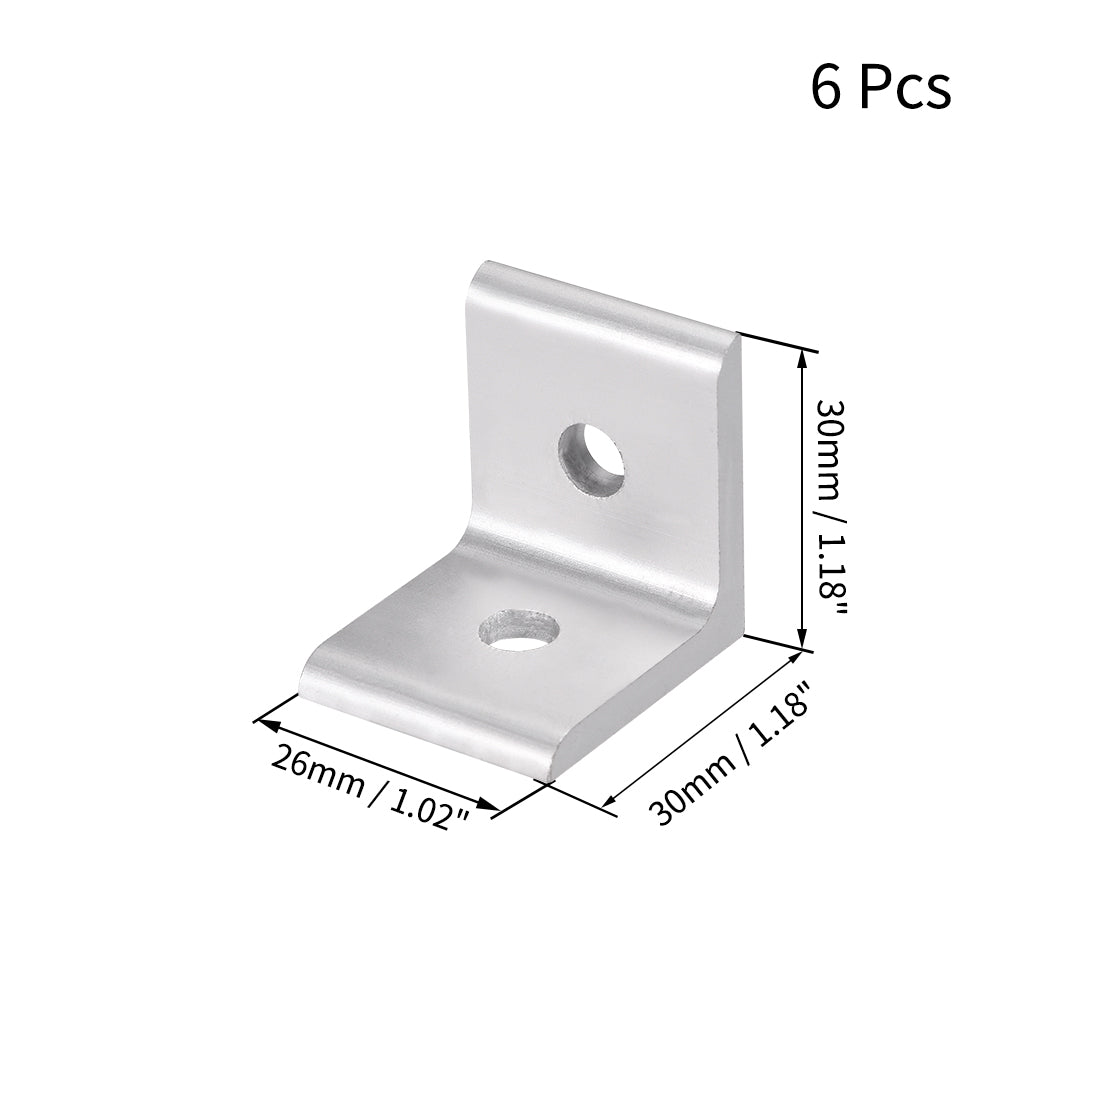 uxcell Uxcell Inside Corner Bracket for 3030 Series Aluminum Extrusion Profile with Slot 8mm, 6 Pcs